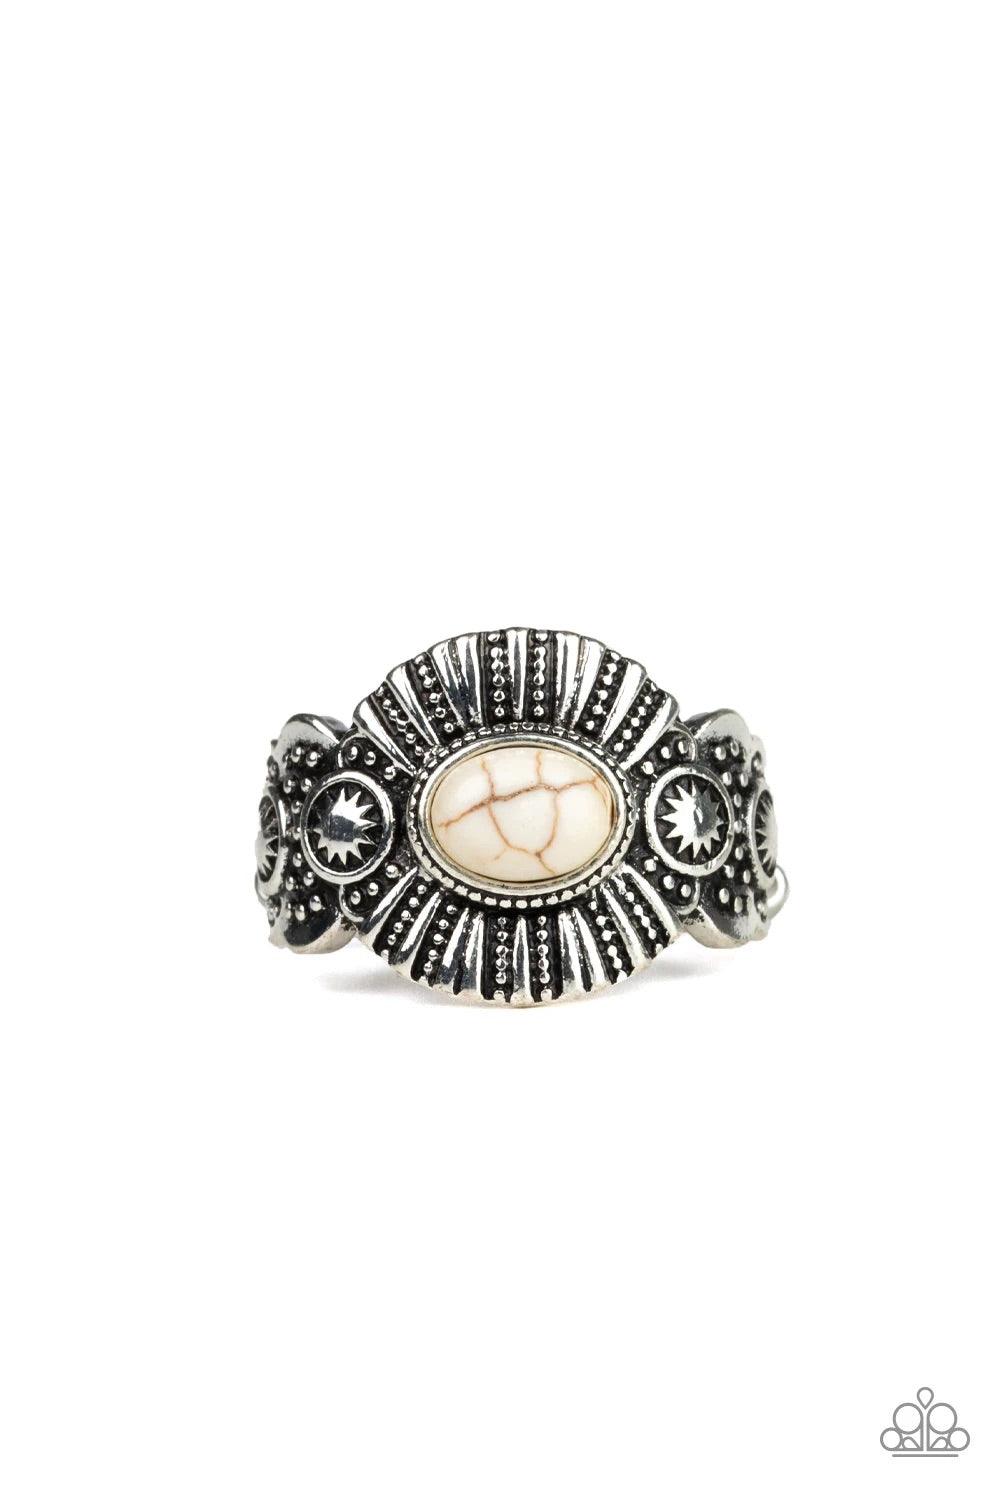 Paparazzi Accessories Thirst Quencher - White An oval white stone is pressed into the center of an ornate silver frame radiating with linear and sunburst patterns for a seasonal flair. Features a dainty stretchy band for a flexible fit. Sold as one indivi